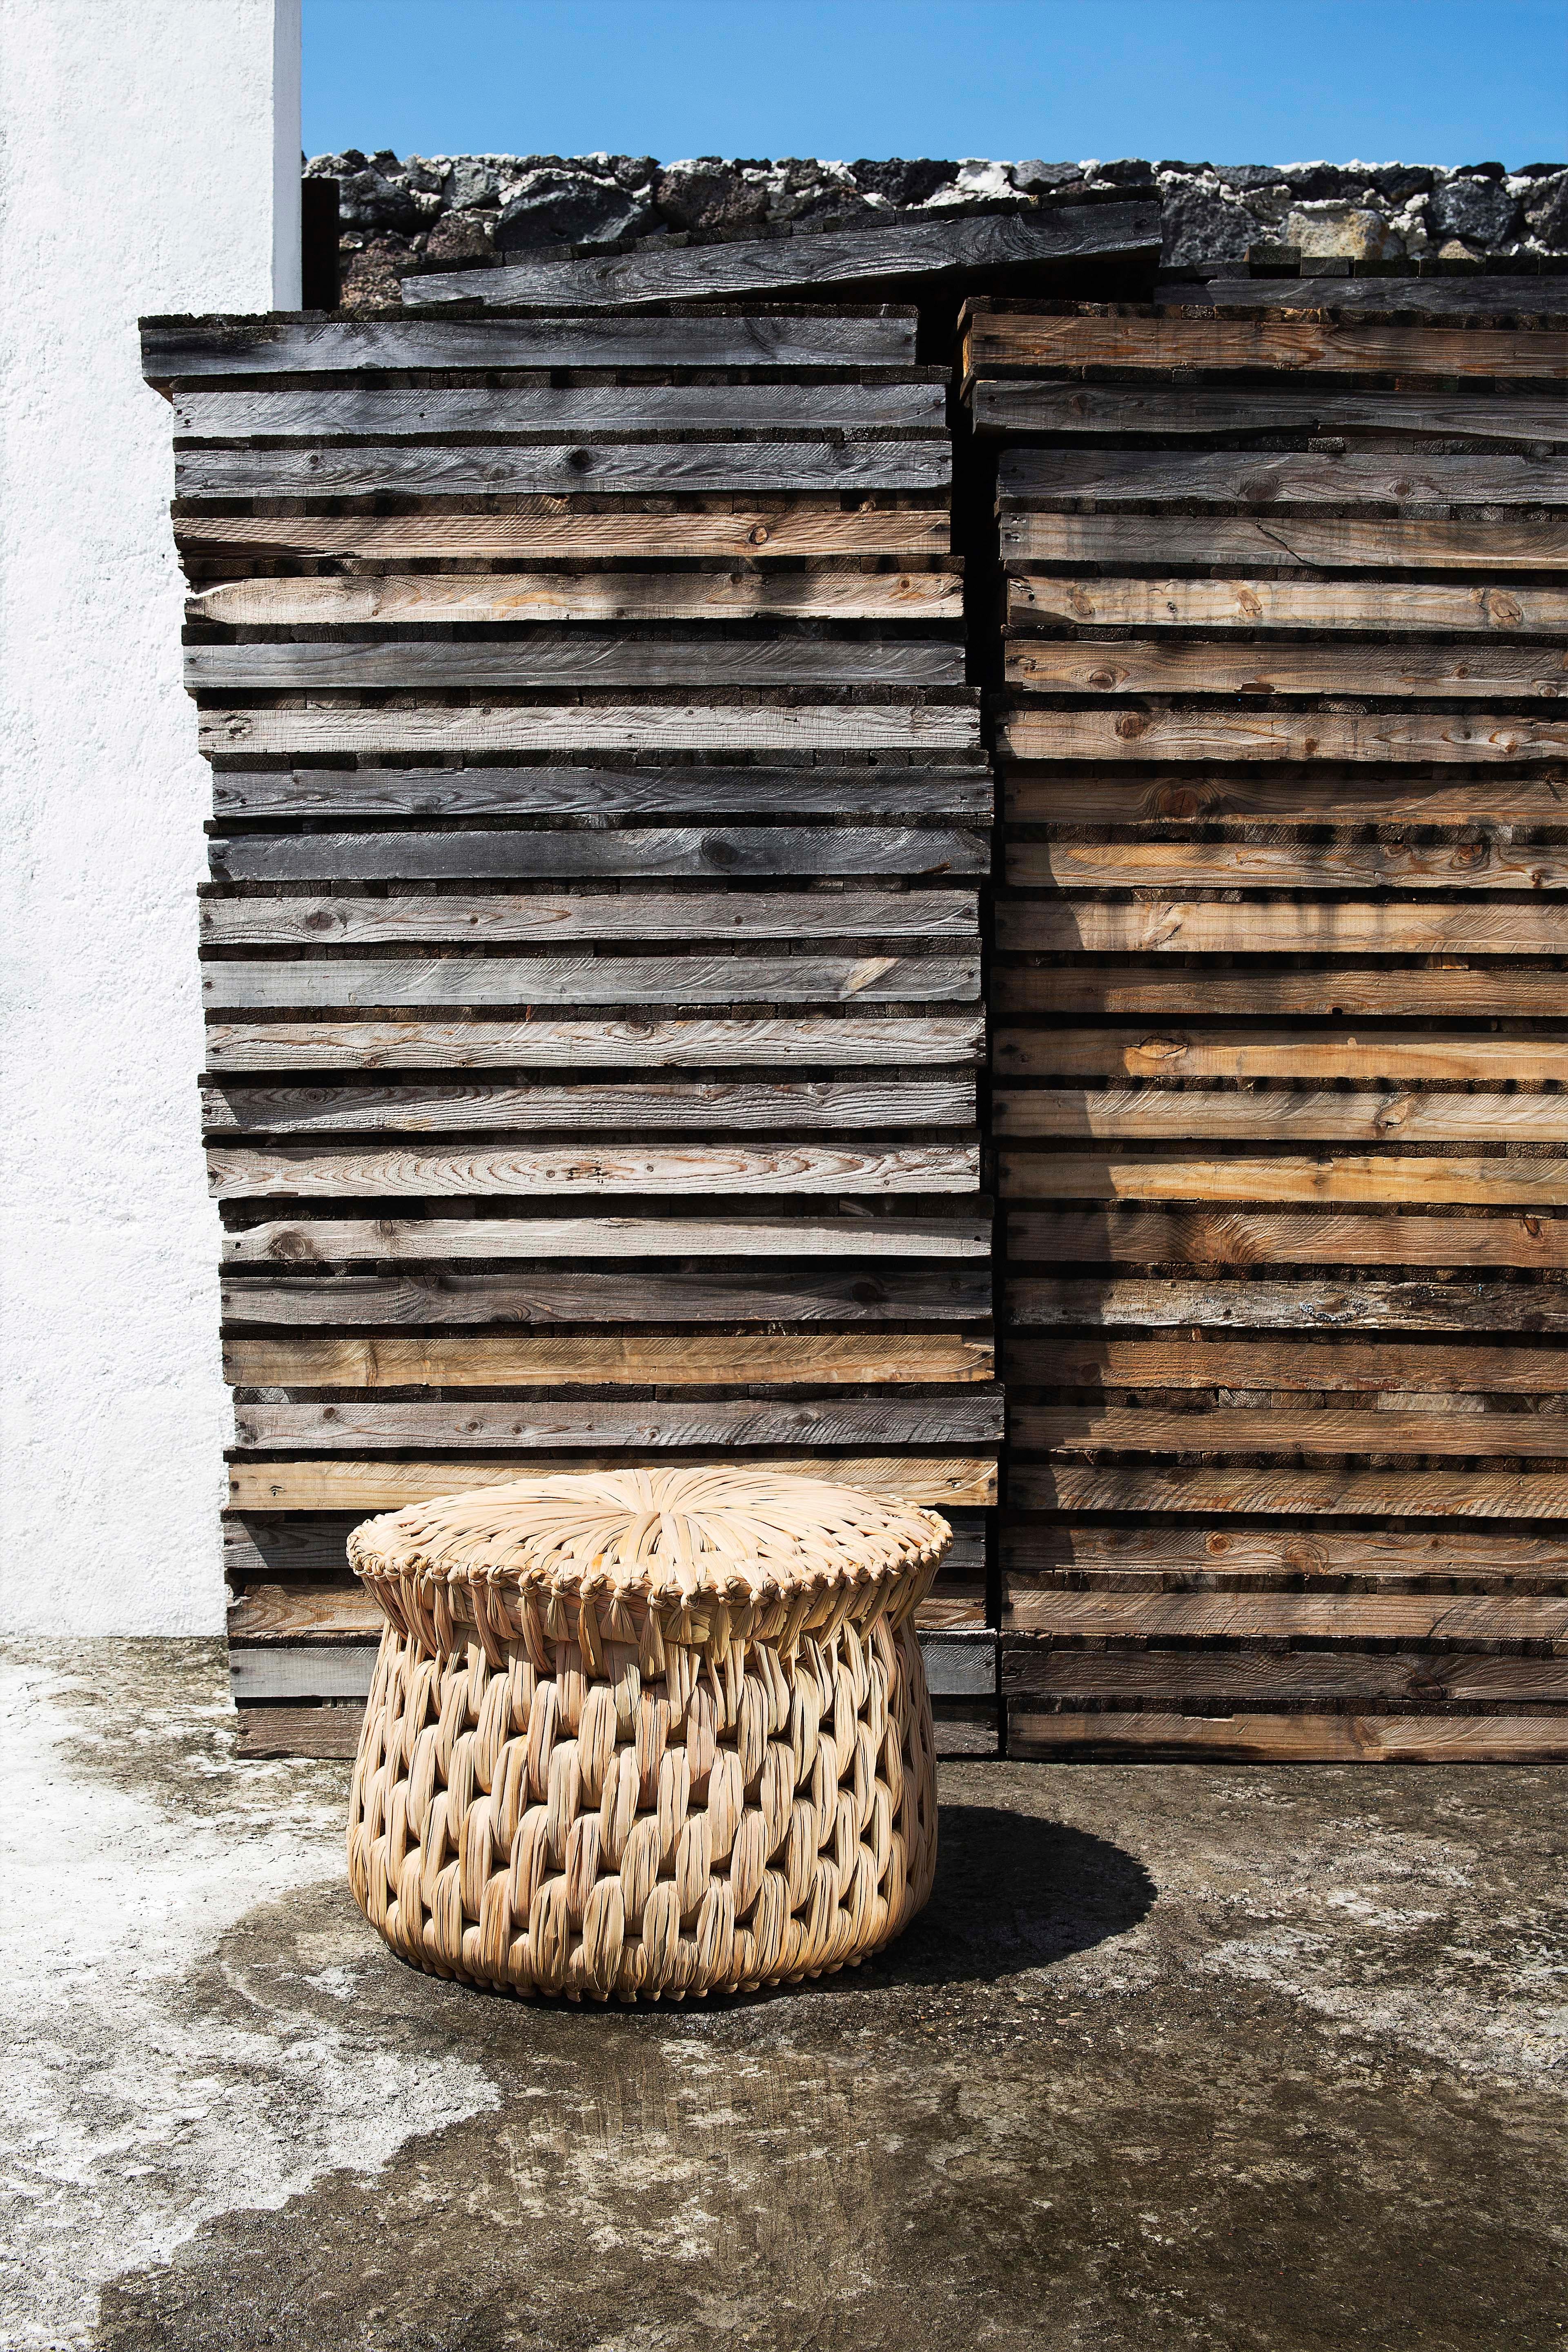 From a craft object to relevant design, these special pieces, made in Mexico, were created to add warmth and texture to your interior. Intended for indoor or covered outdoor use (must not get wet), they are a reminder of the incredible workmanship